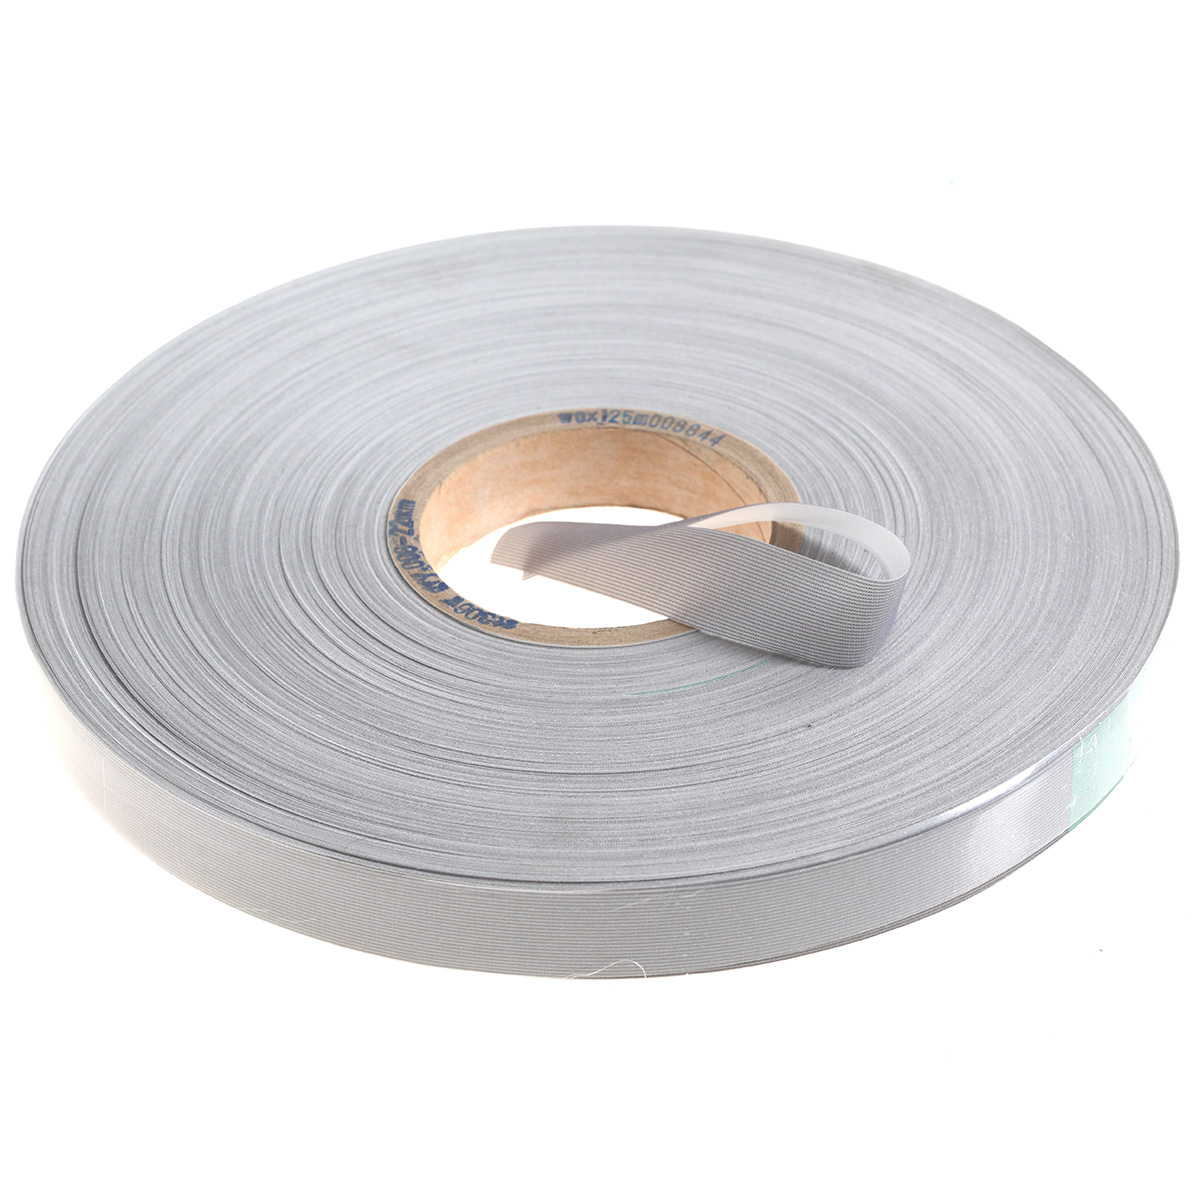 Waders and Jackets Repair Tape 1m